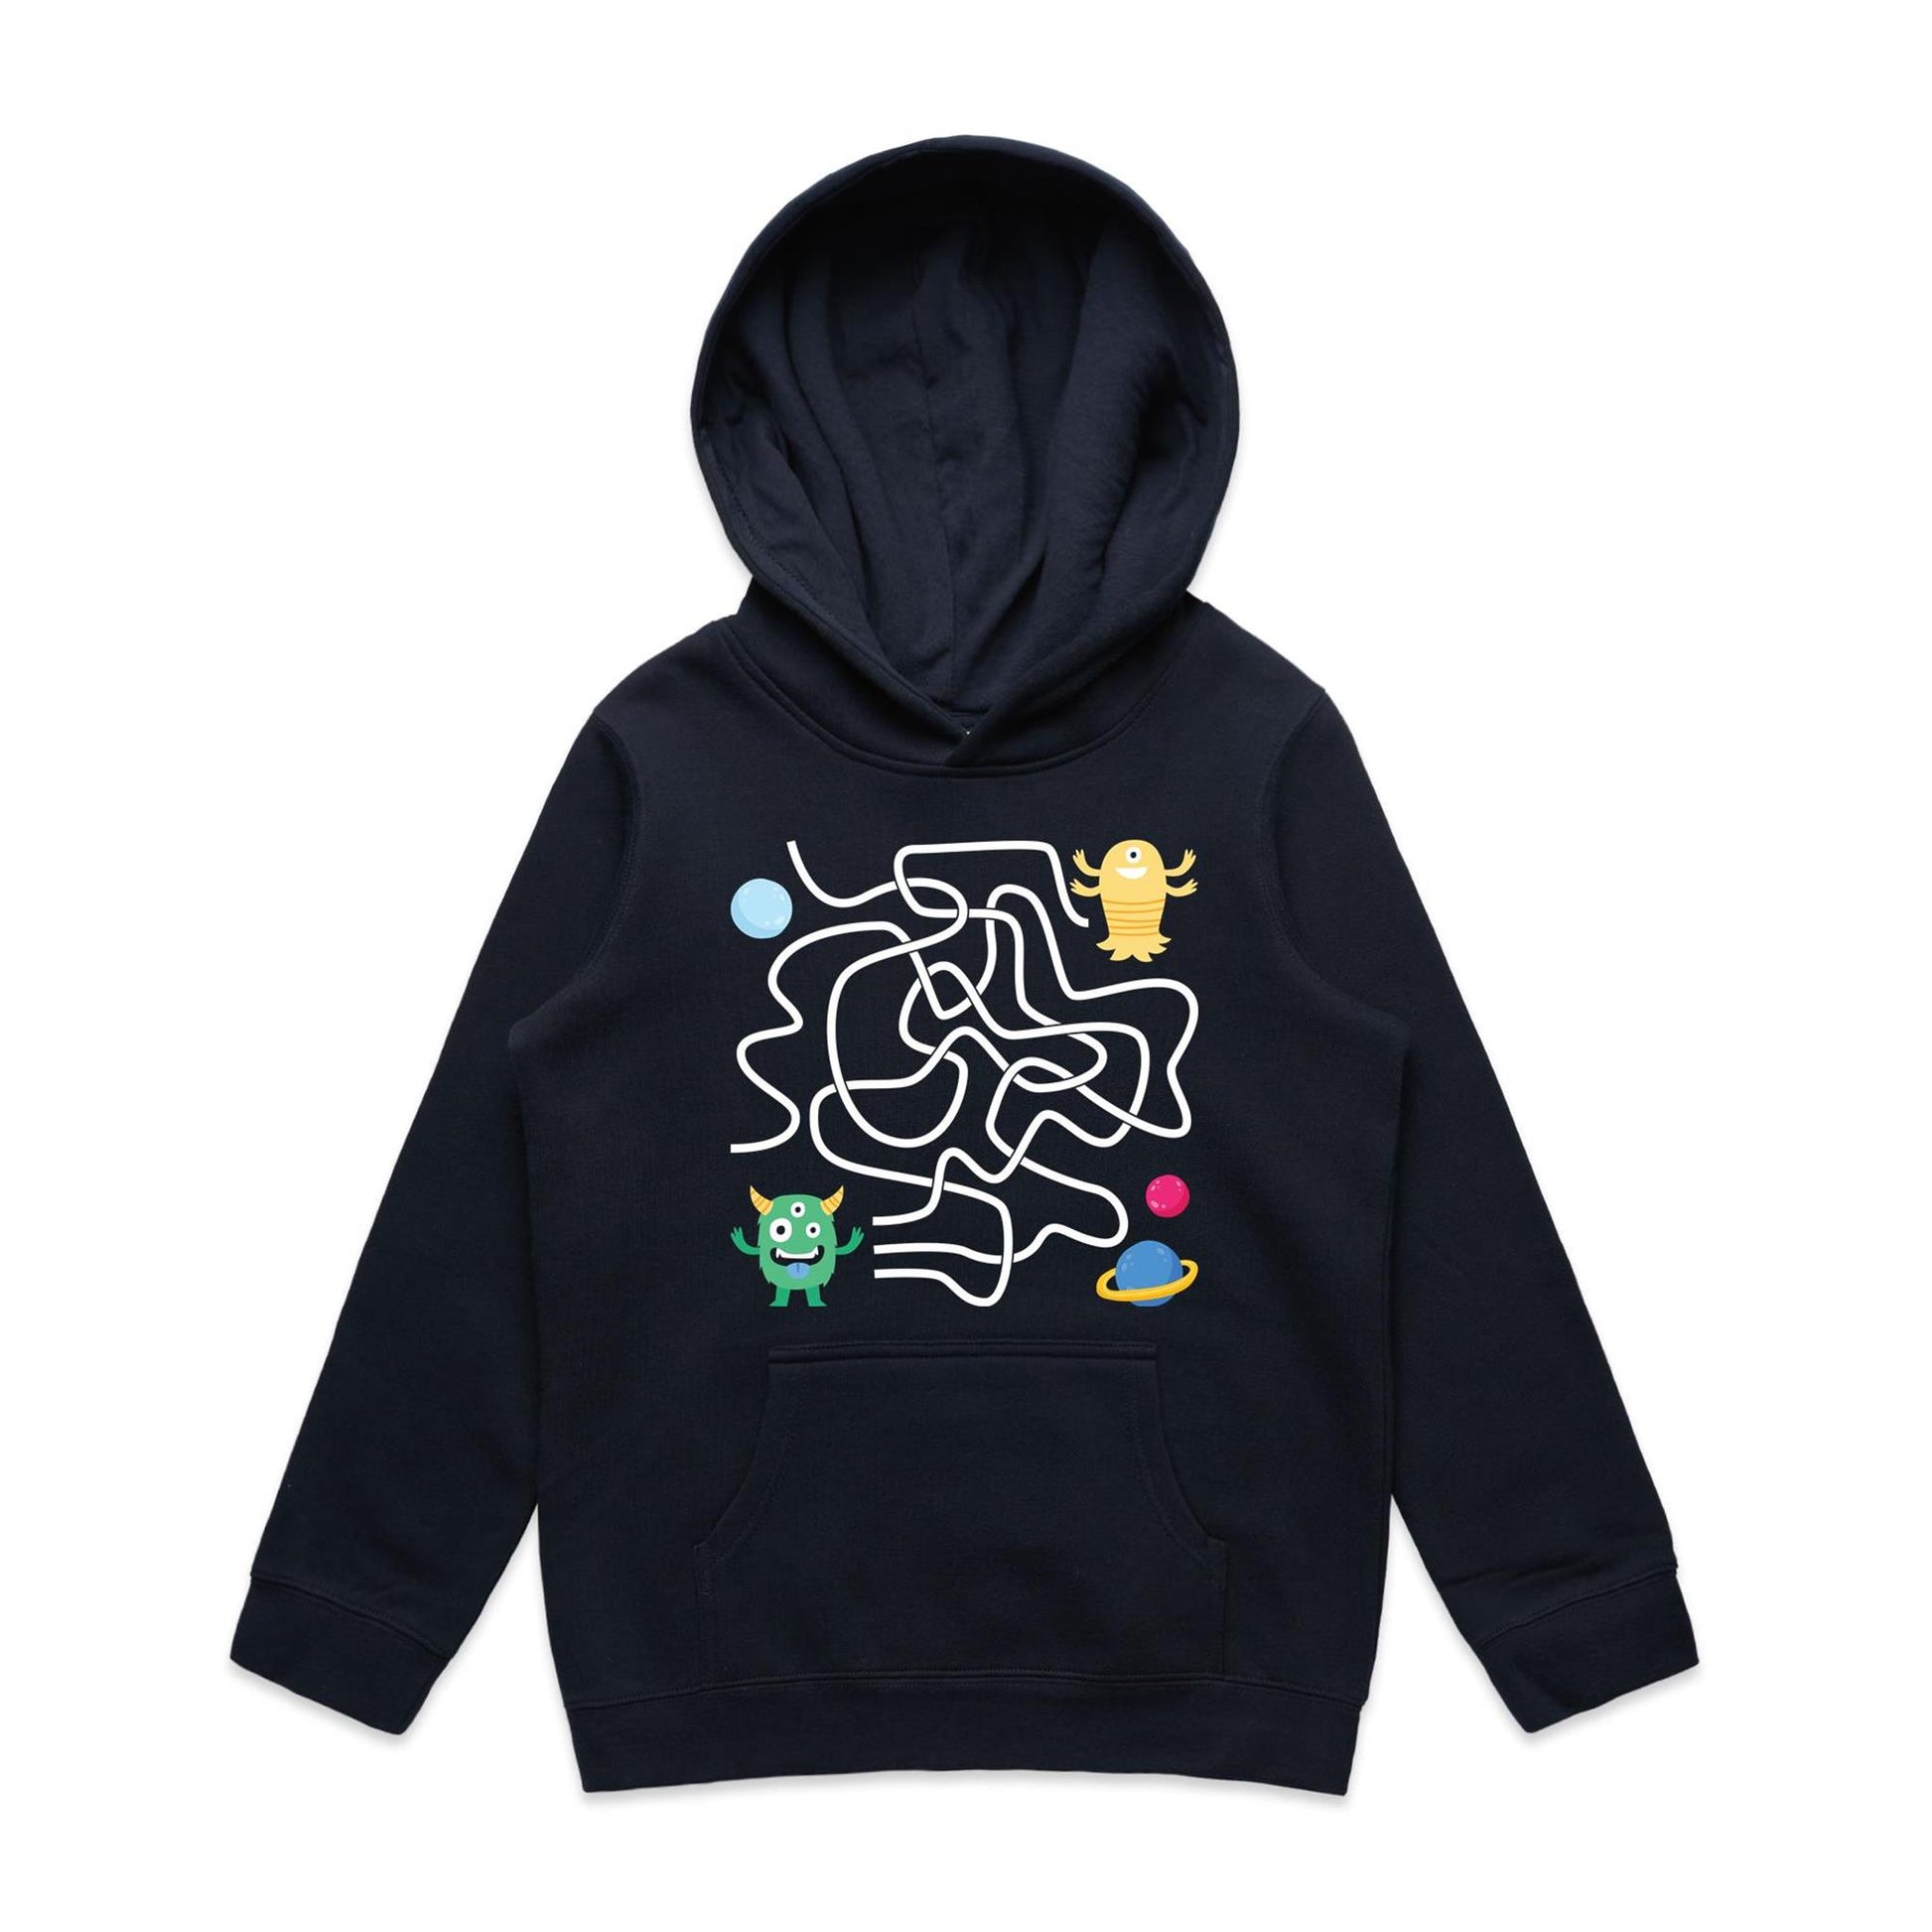 Find The Right Path, Space Alien - Youth Supply Hood Navy Kids Hoodie Sci Fi Space